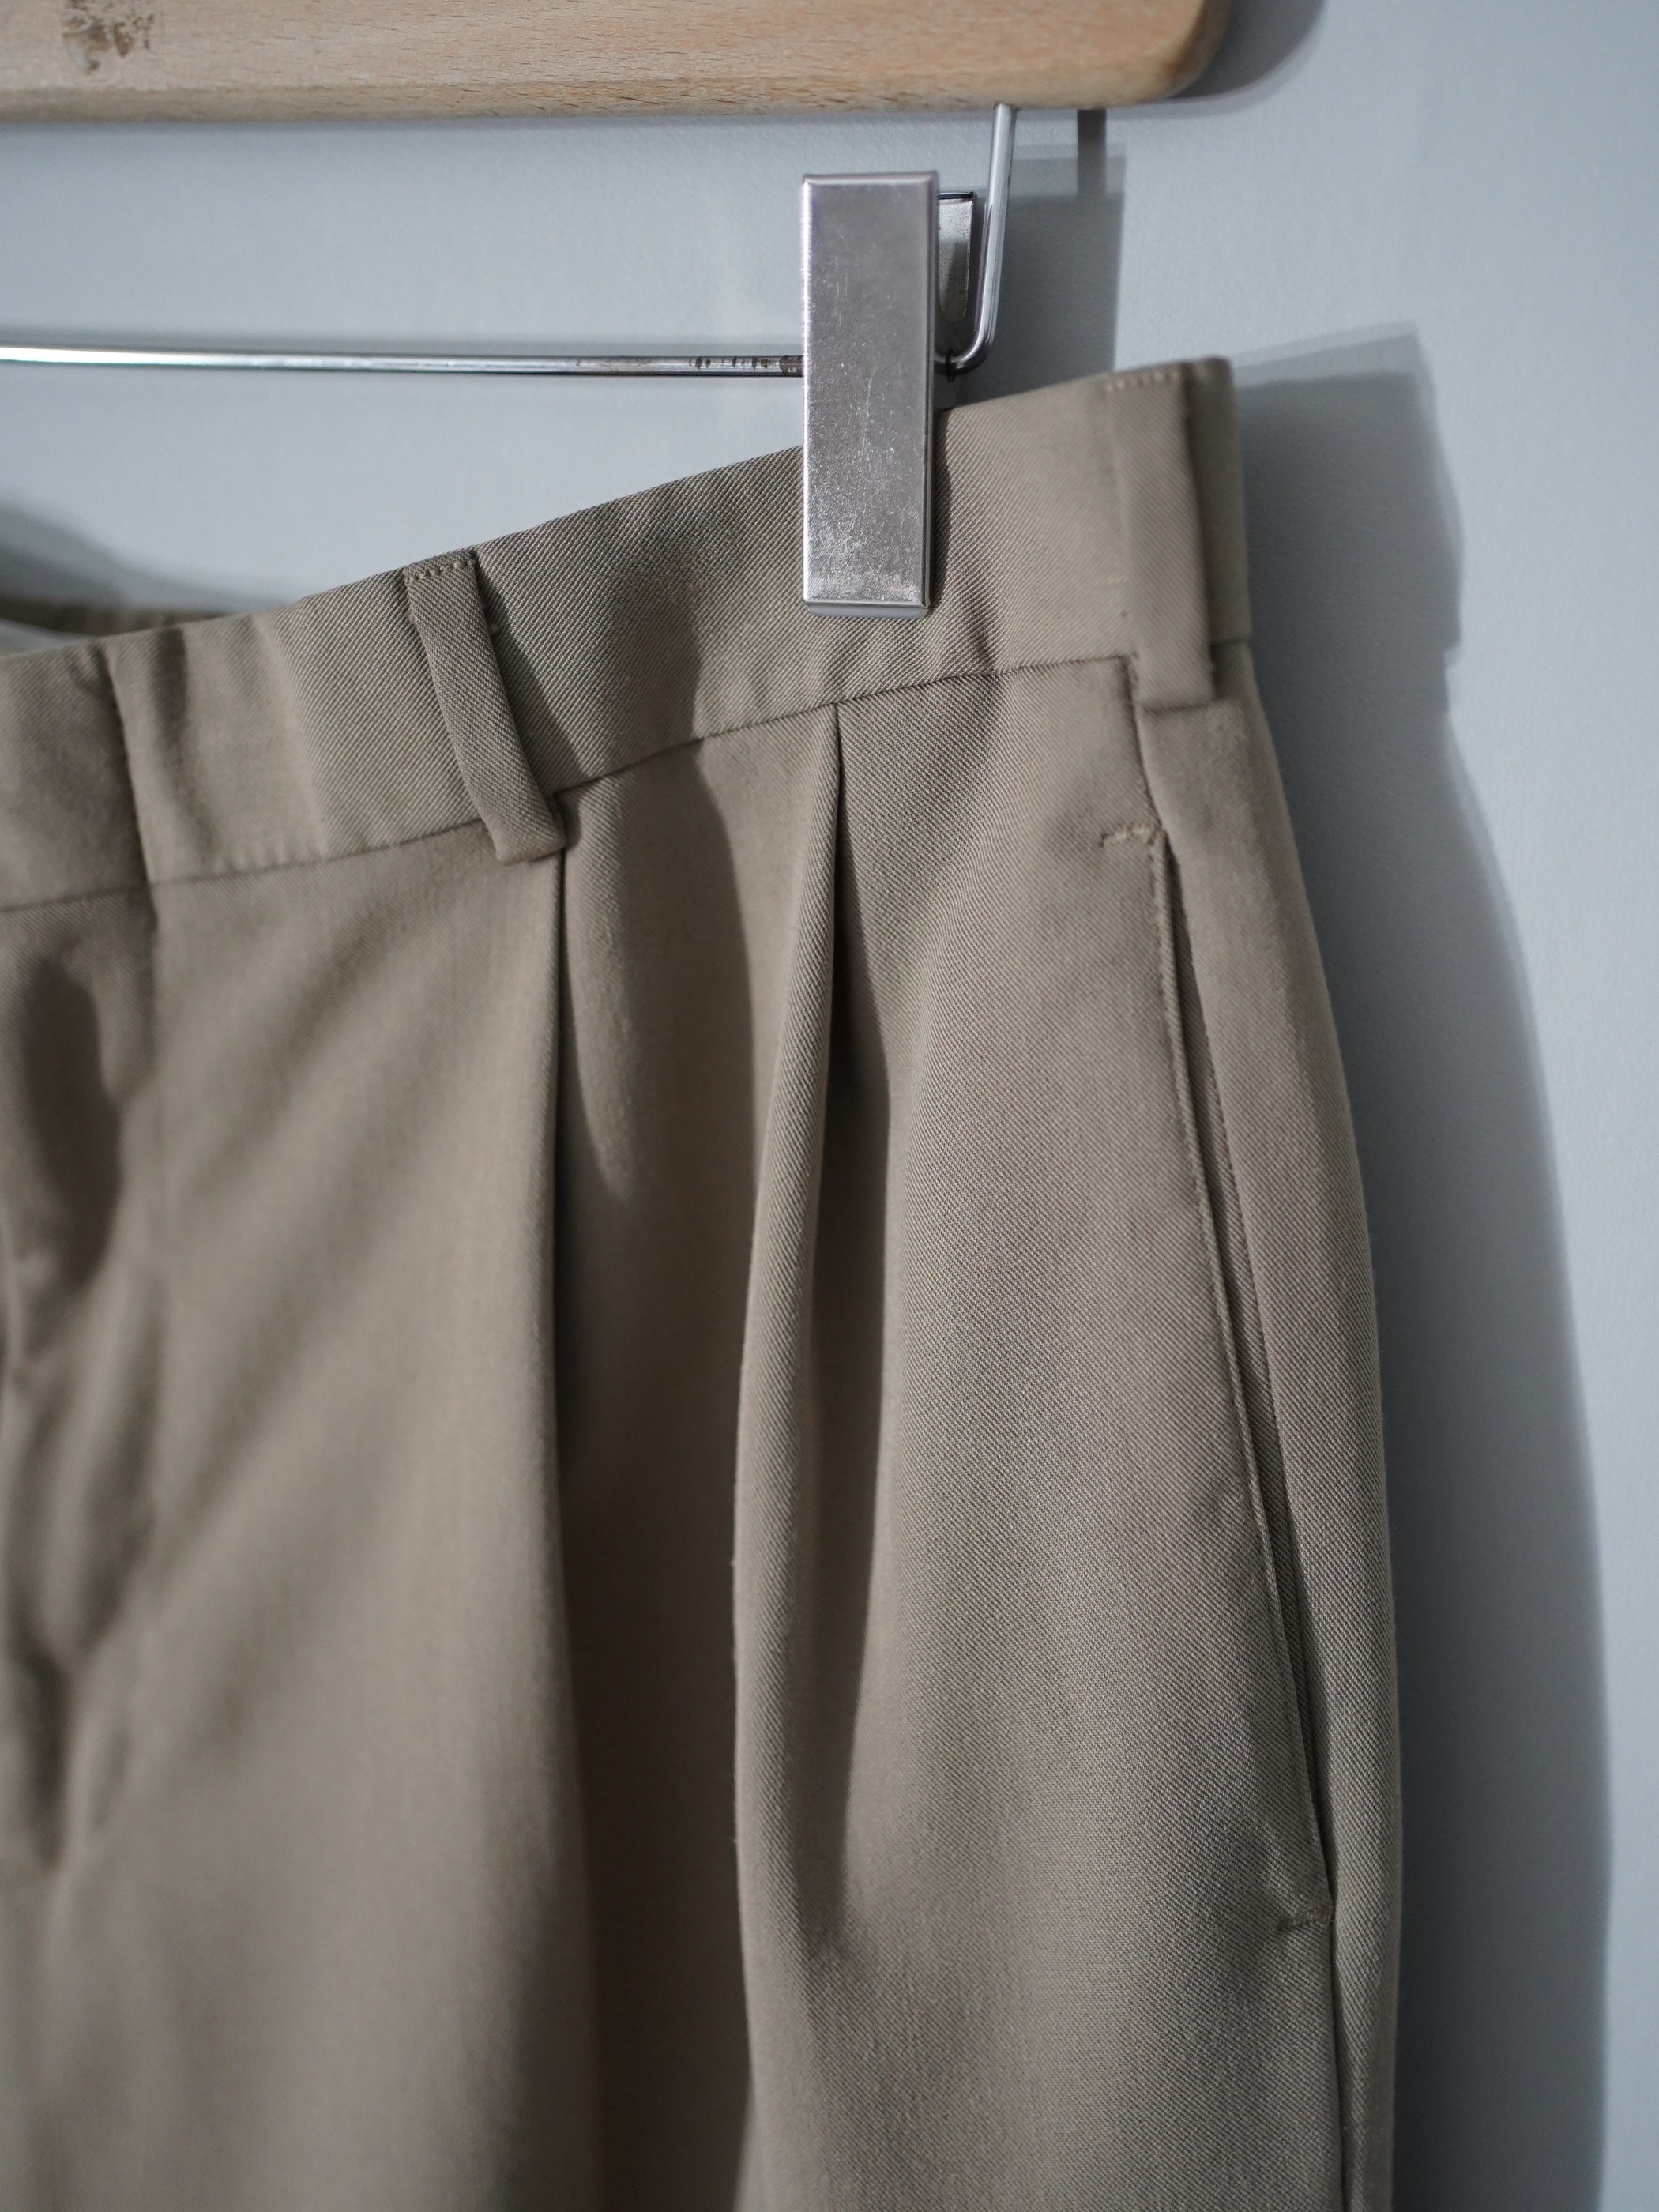 1990's Levi's Action choice 2tuck dress trousers